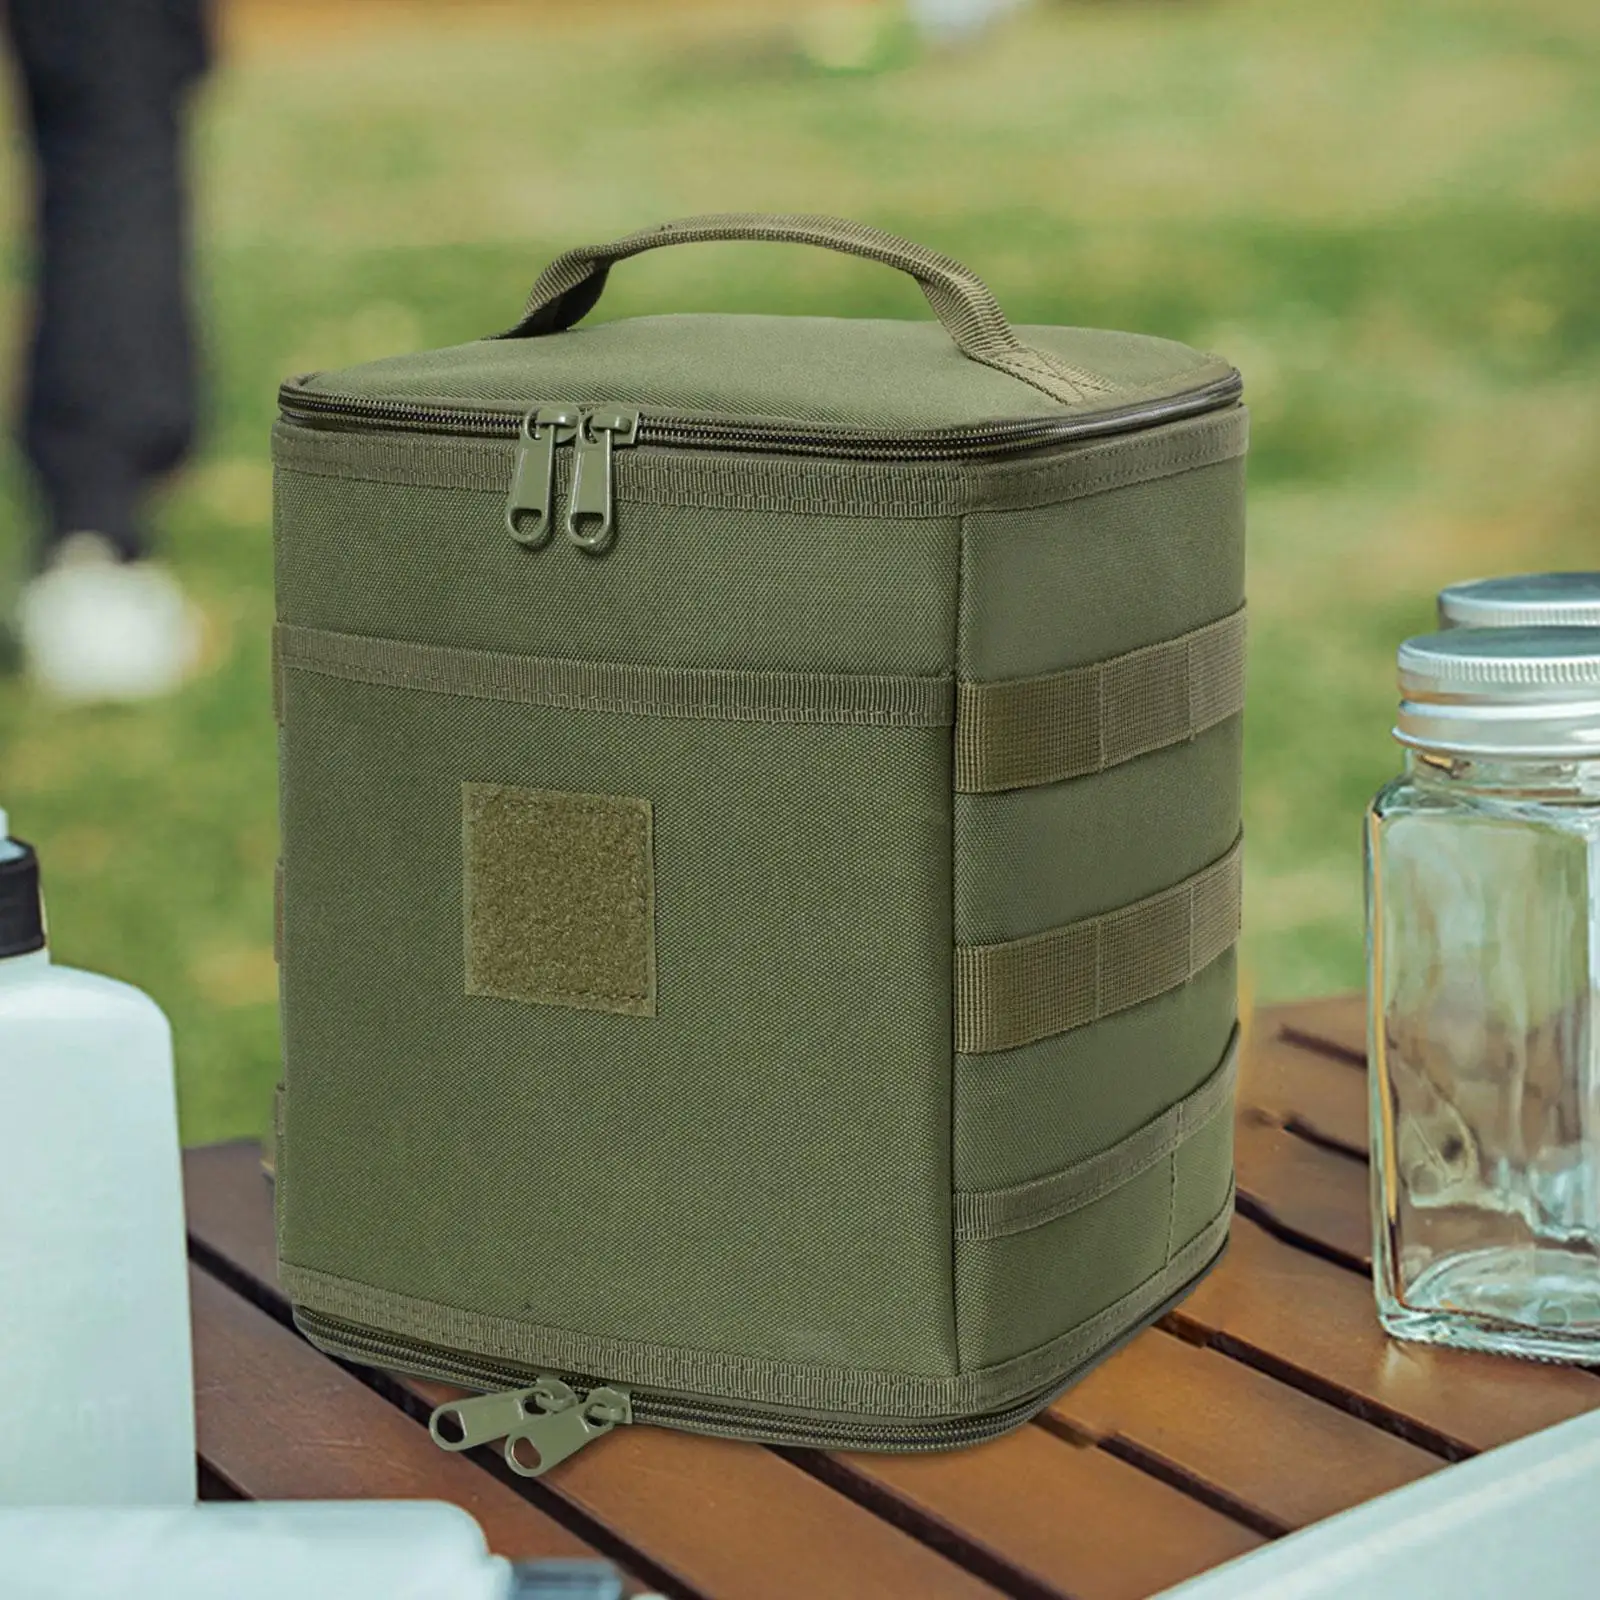 Gas Tank Storage Bag Tableware Storage Bag Large Capacity Protector Storage Case for Cooking Outdoor Camping Travel Backpacking